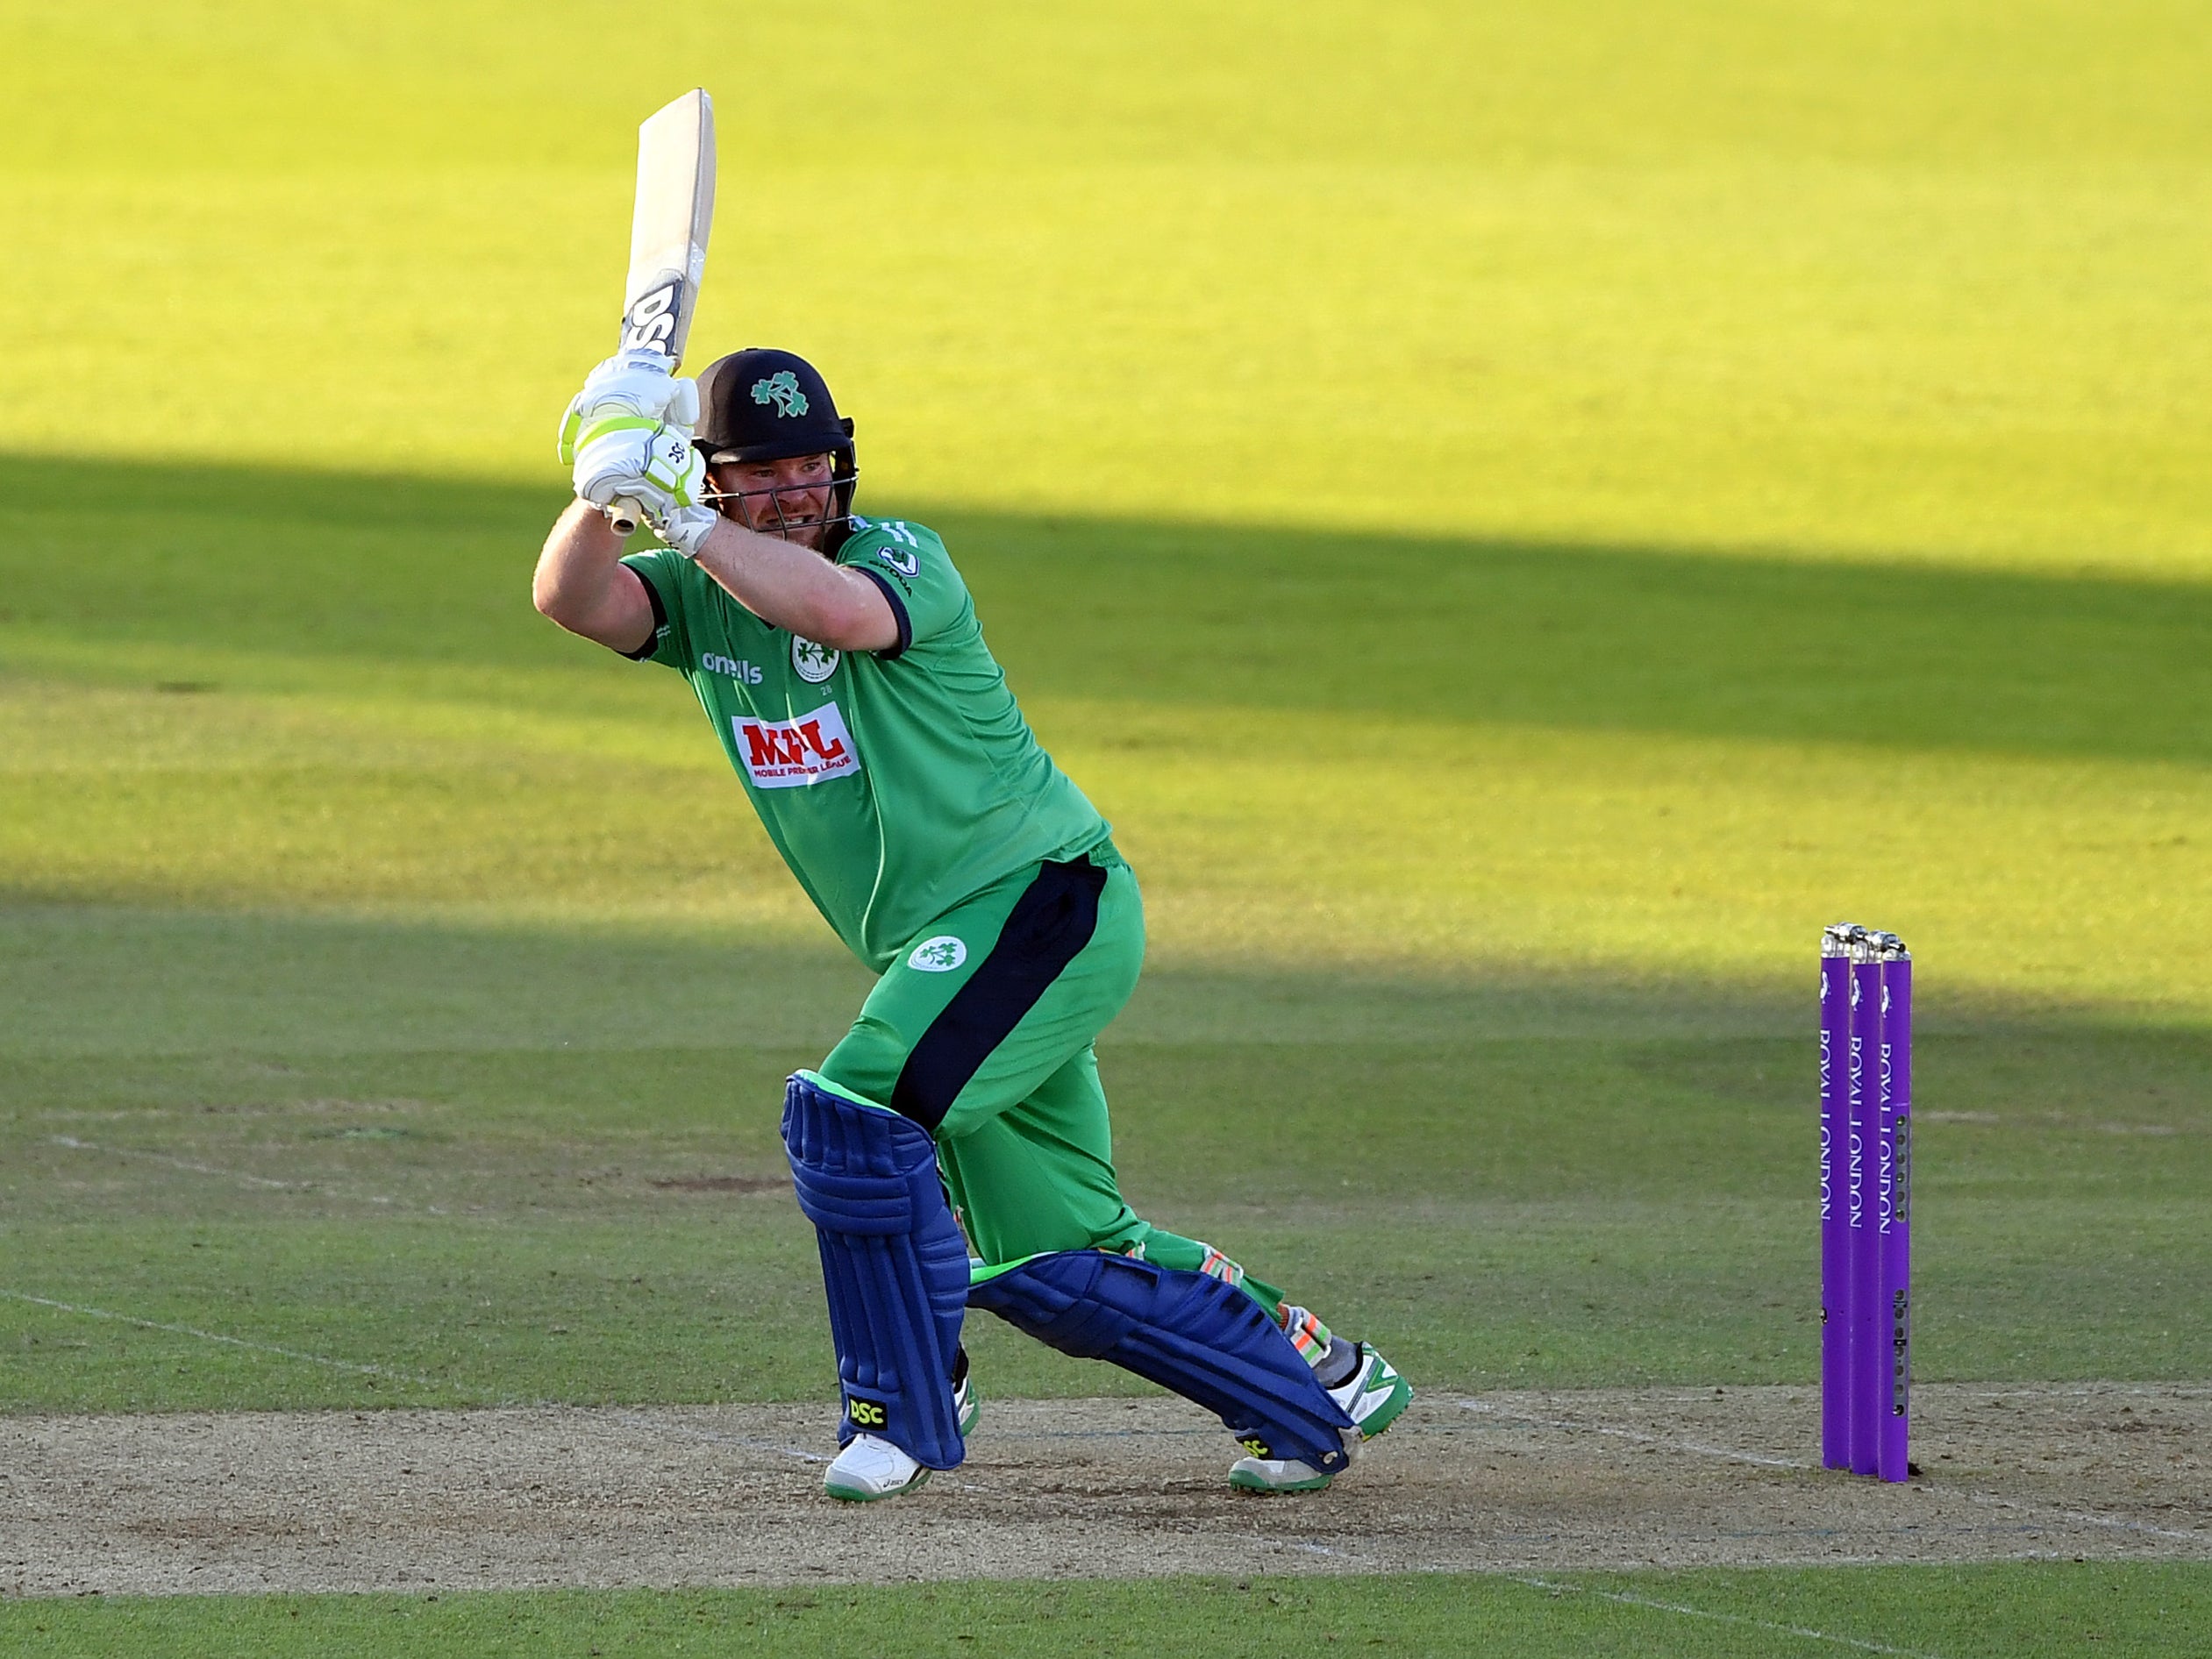 Paul Stirling will be key to Ireland’s chances